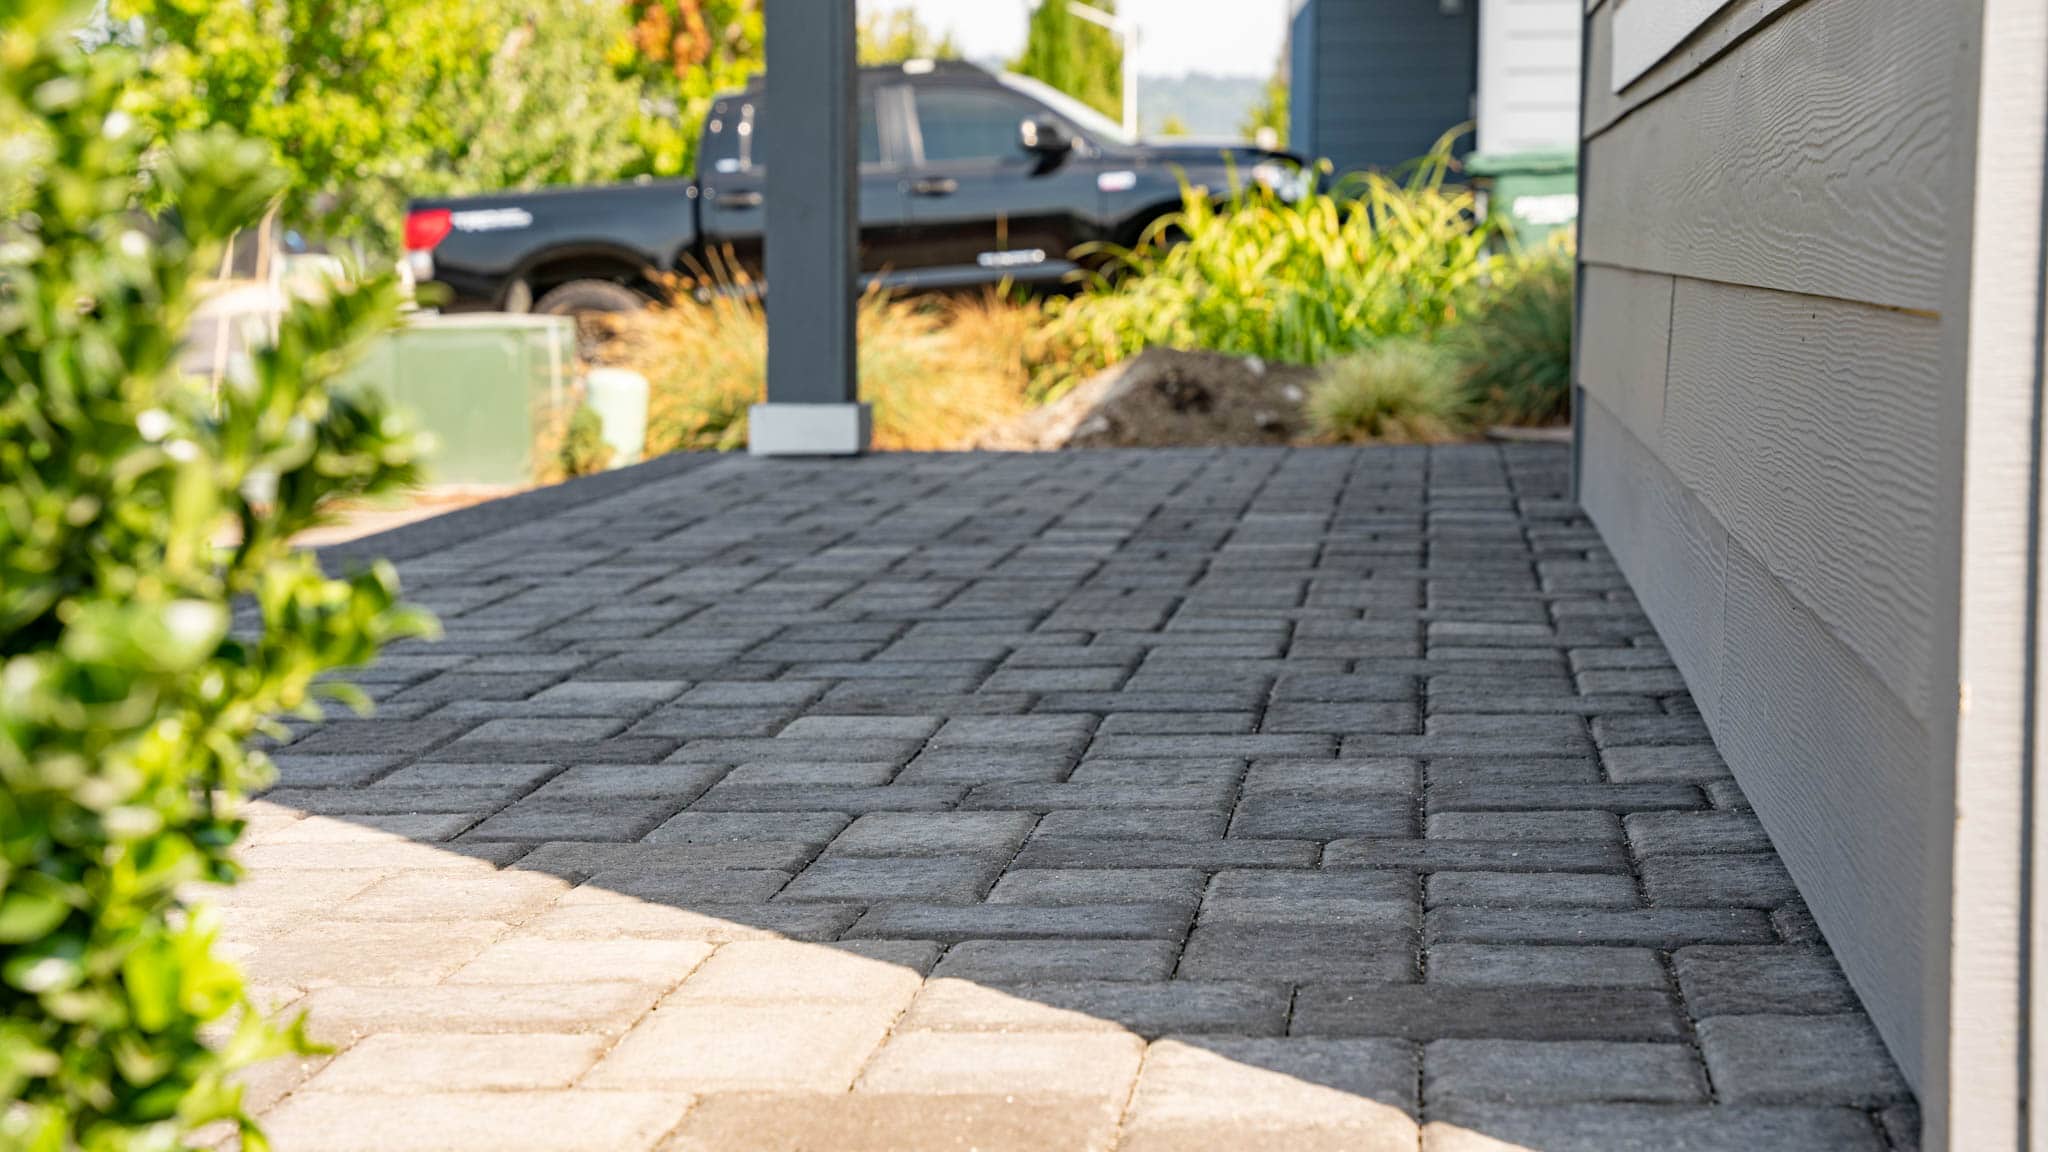 How To Install Patio Pavers Over An Existing Concrete Slab